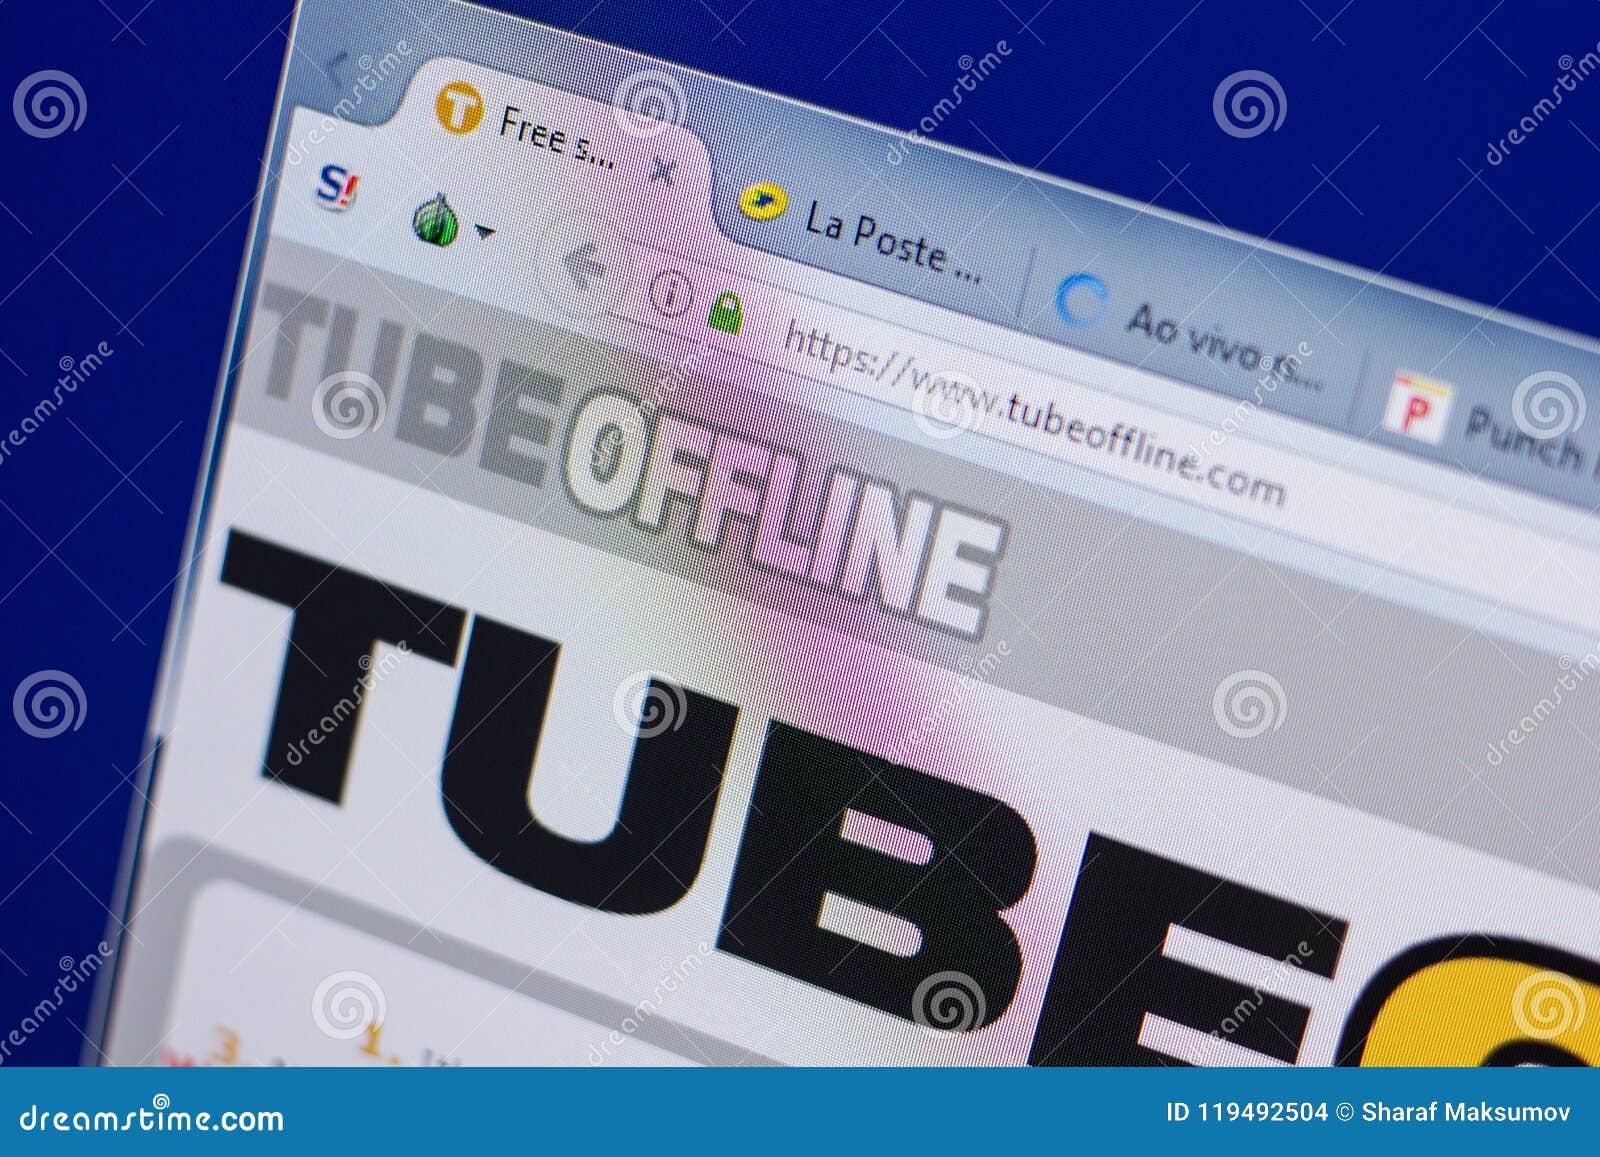 Tubeoffline Stock Photos - Free & Royalty-Free Stock Photos from Dreamstime